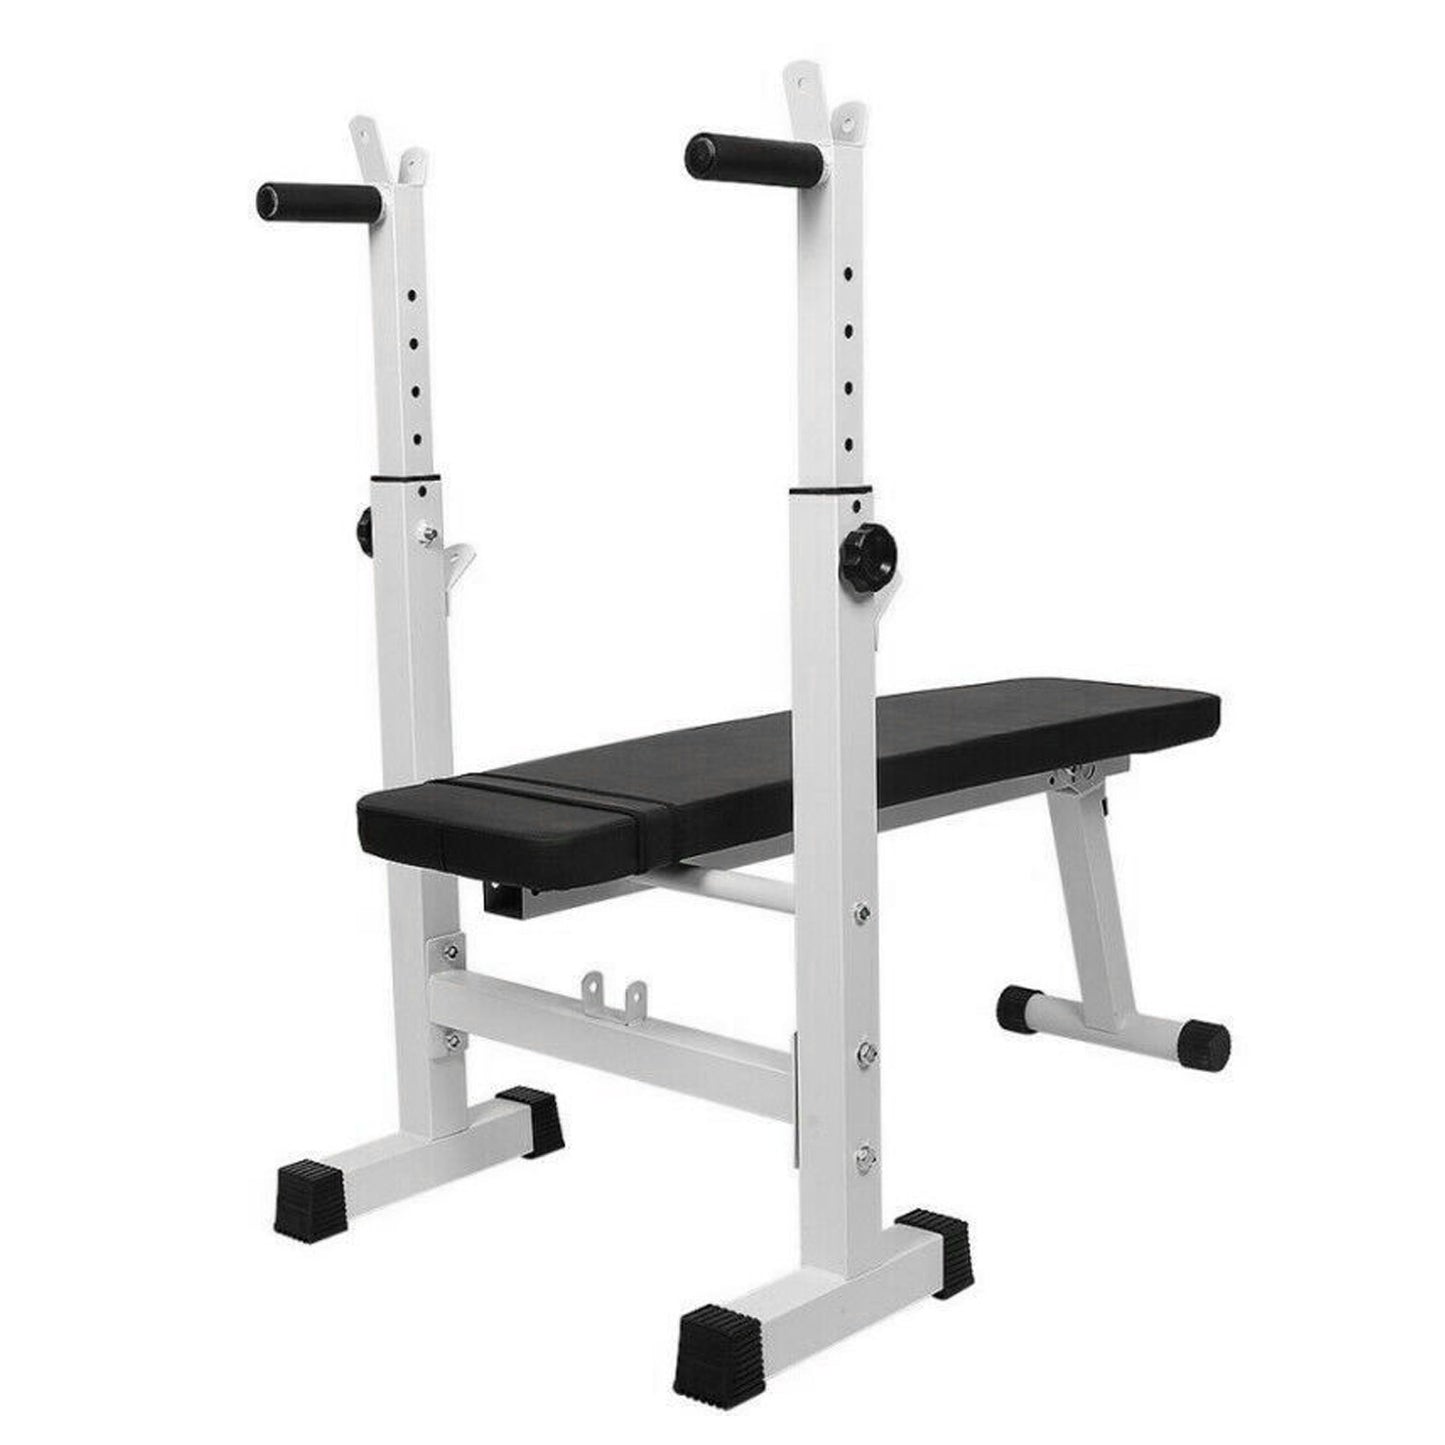 MAXSTRENGTH Adjustable Weight Bench Dip Station Barbell Rack